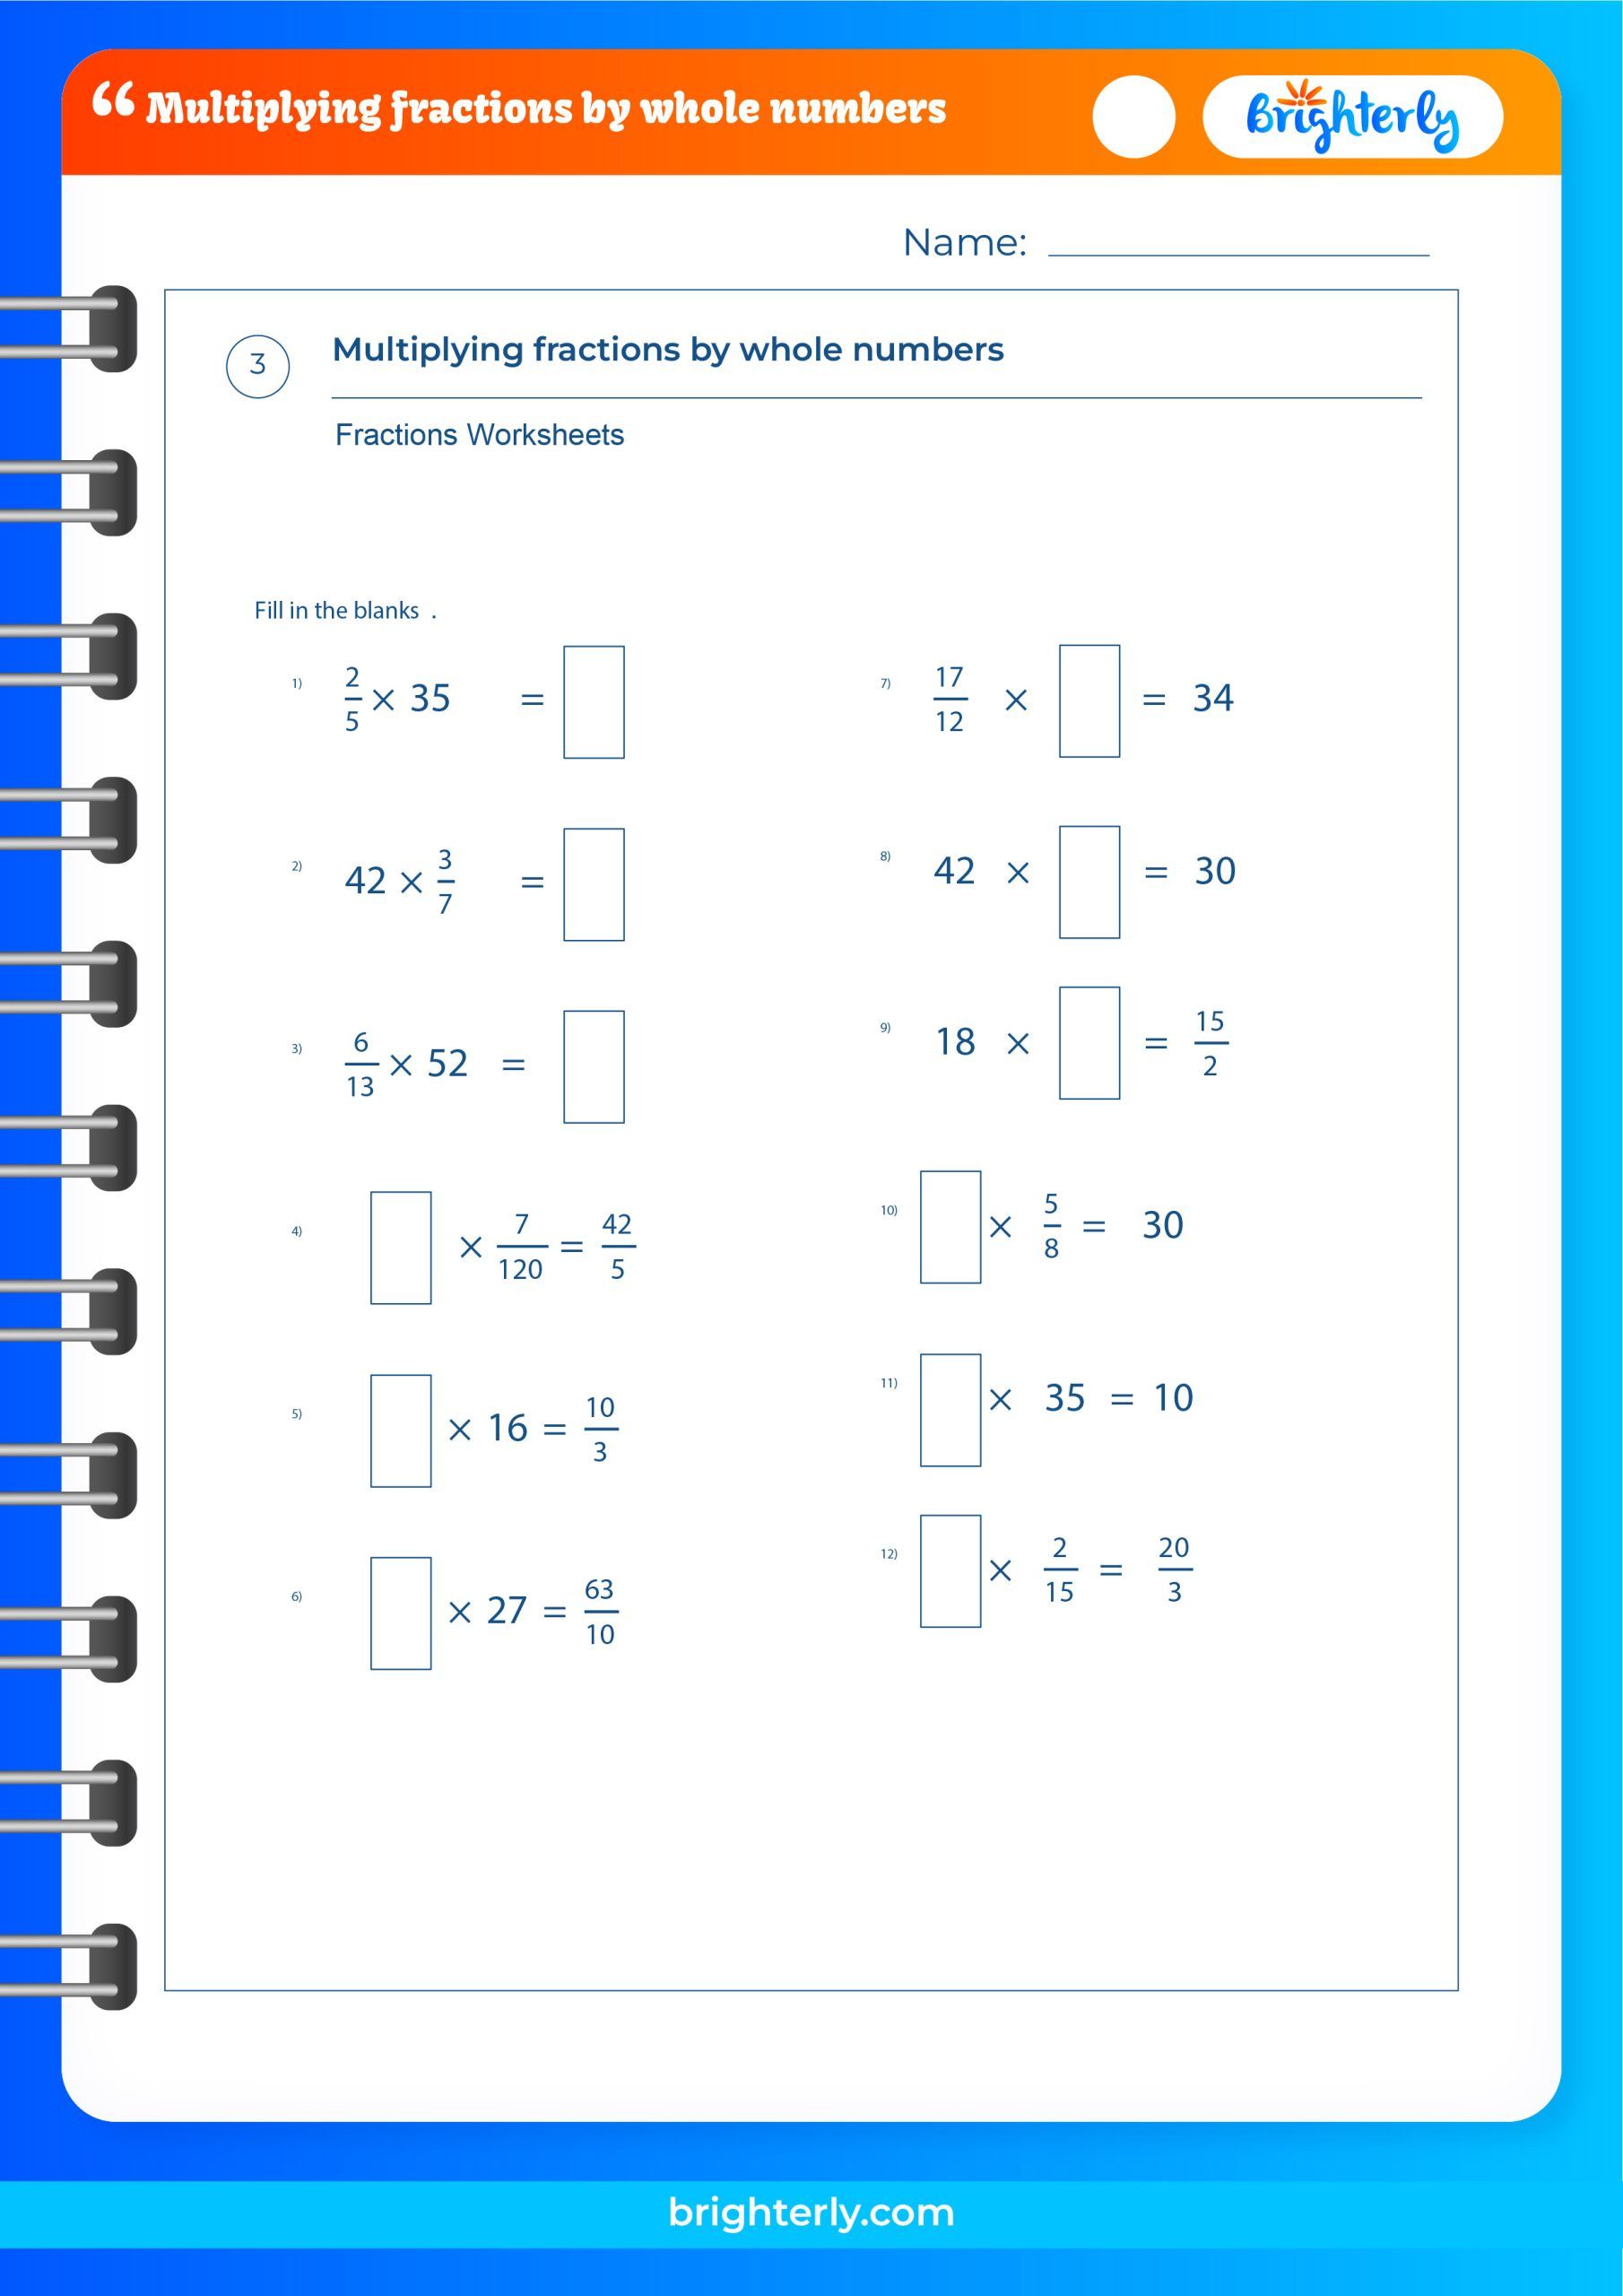 multiplying-fractions-by-whole-numbers-worksheet